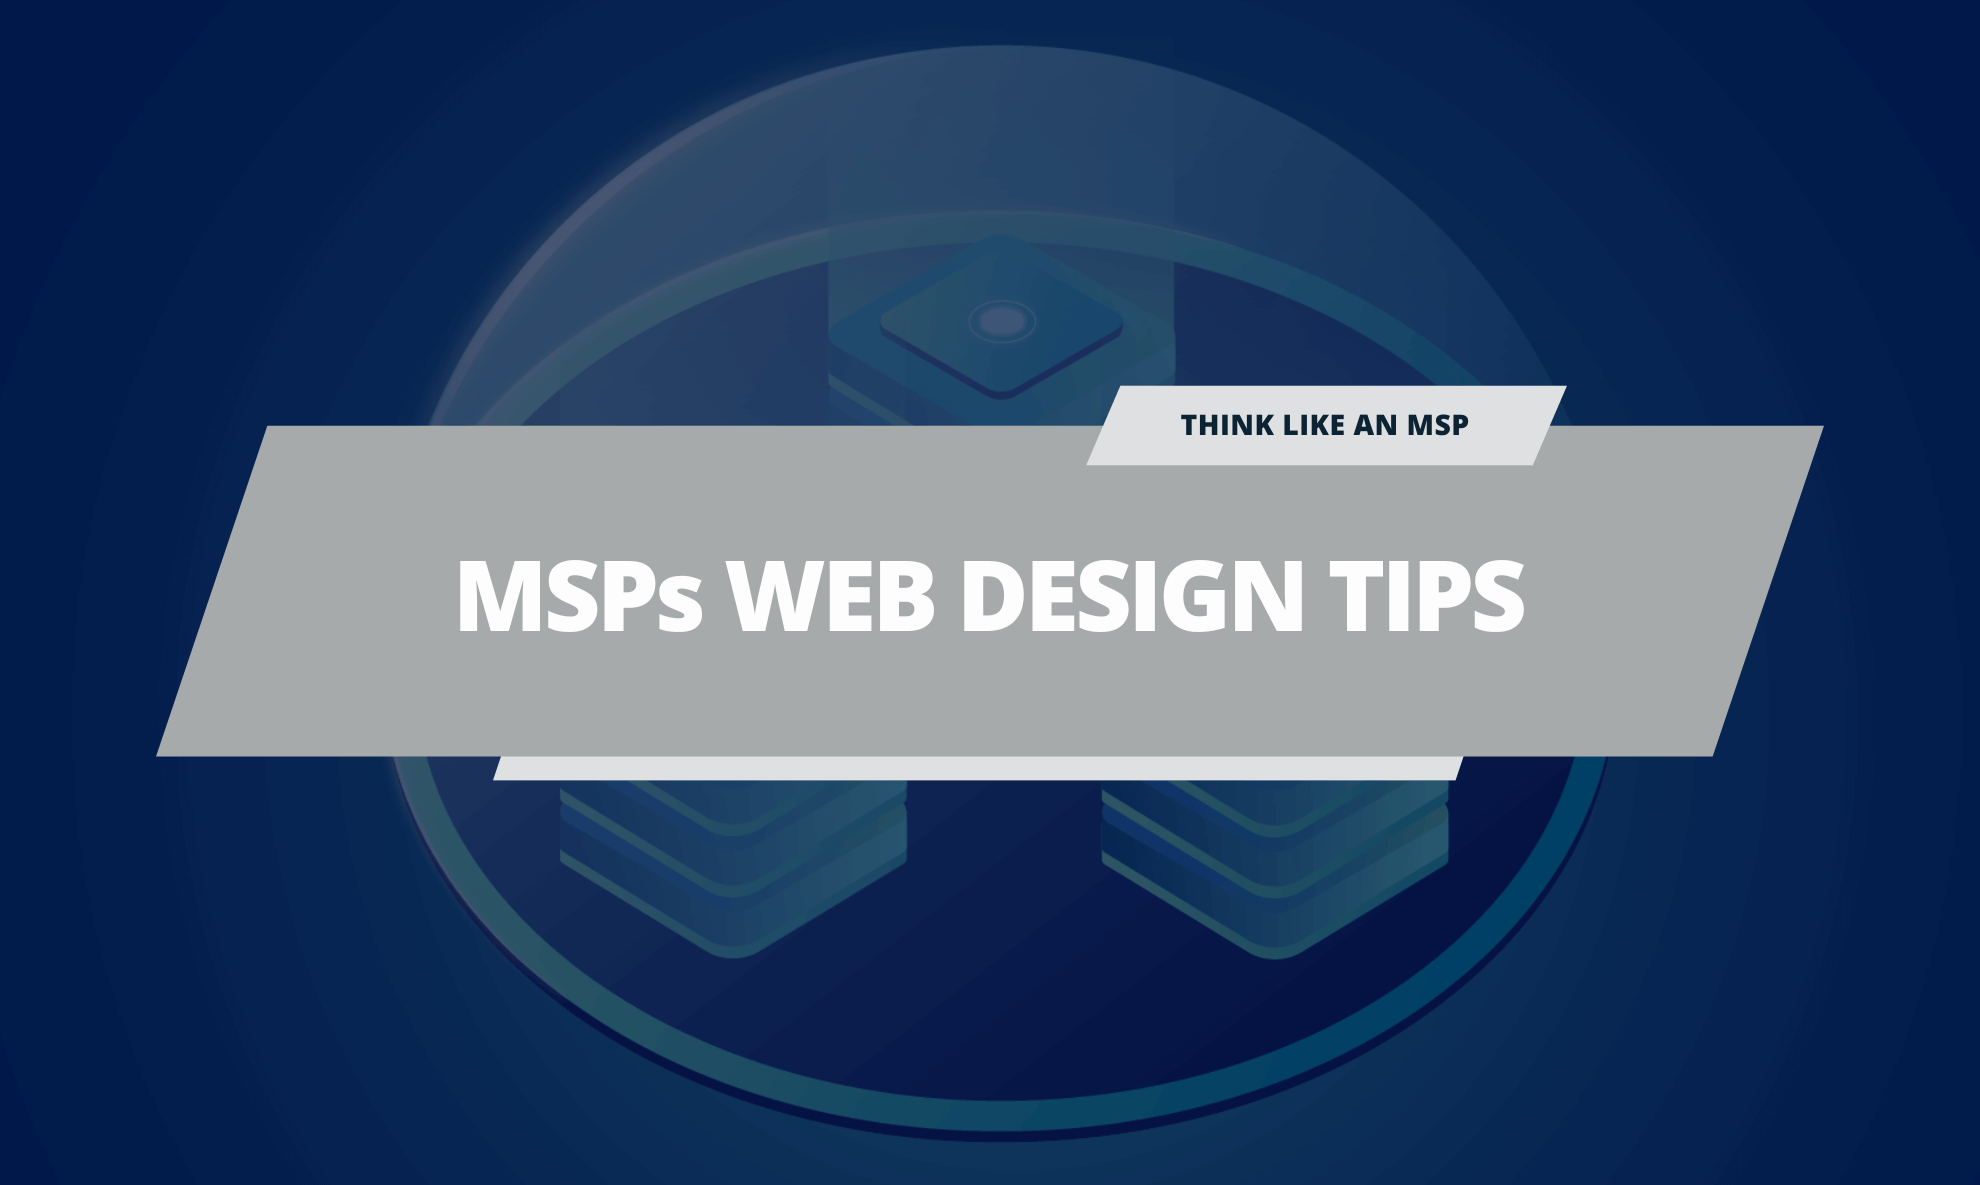 5 MSPs Website Design Tips to Build Trust & Credibility